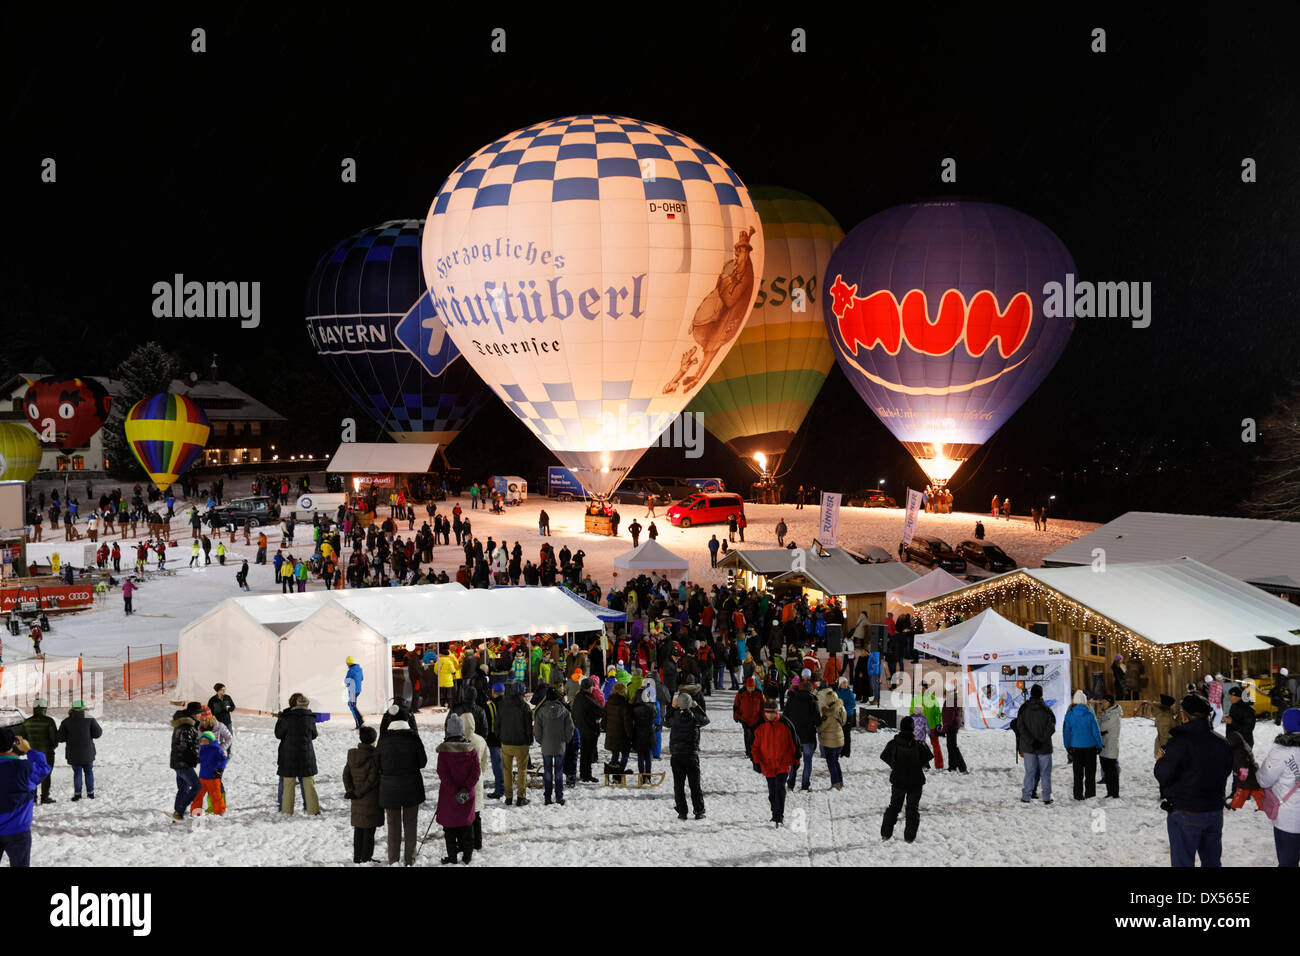 Night glow at the Montgolfiade balloon event in Tegernsee, Upper Bavaria,  Bavaria, Germany Stock Photo - Alamy